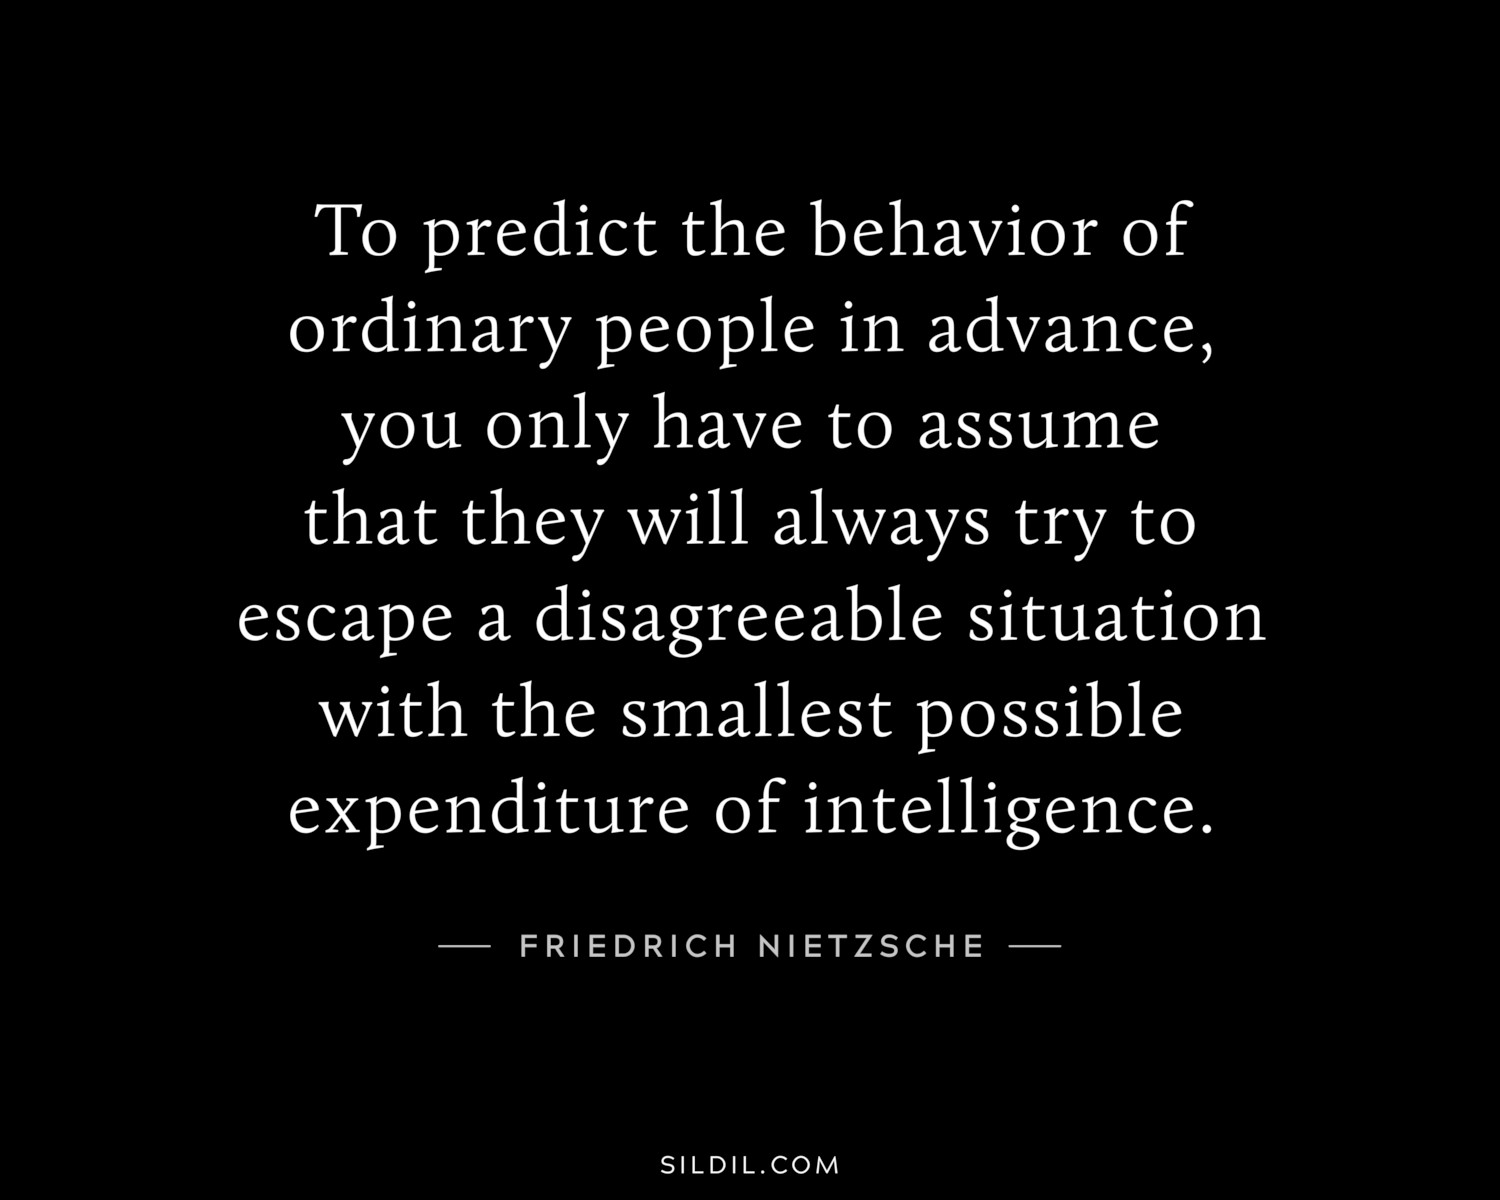 To predict the behavior of ordinary people in advance, you only have to assume that they will always try to escape a disagreeable situation with the smallest possible expenditure of intelligence.